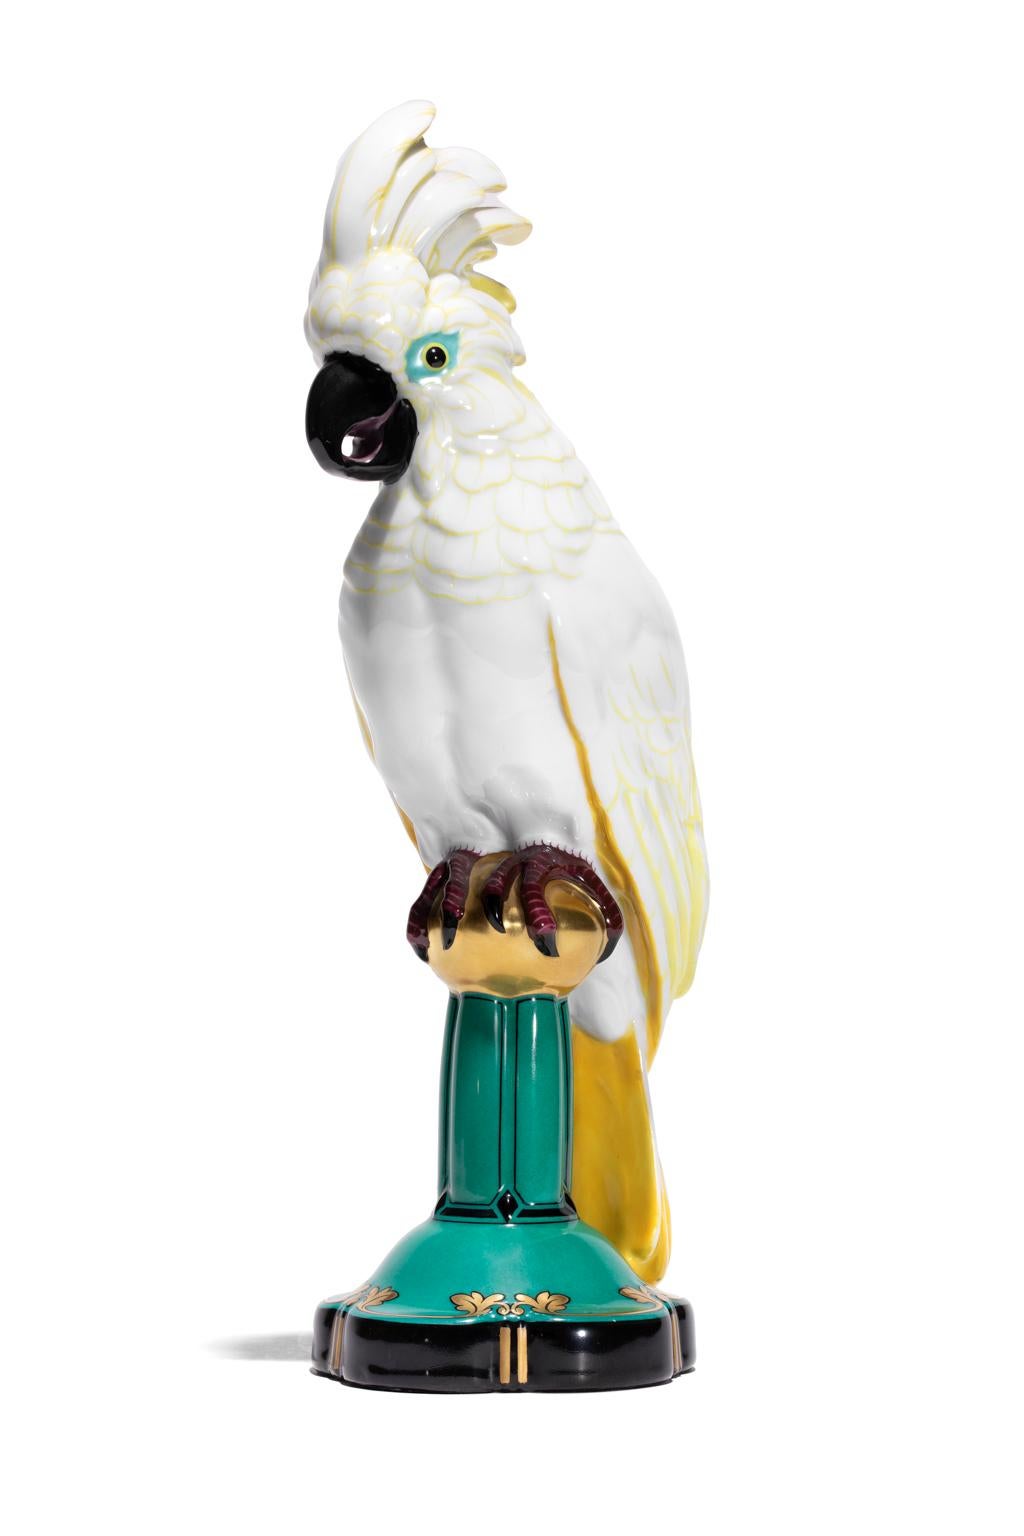 Cockatoo's with their glorious crown of plumage think they own the world and this one certainly does. It sits with royal dignity upon its lusciously painted Veridian and Gold glazed column. An exquisite Hutschenreuther-Selb porcelain that is over